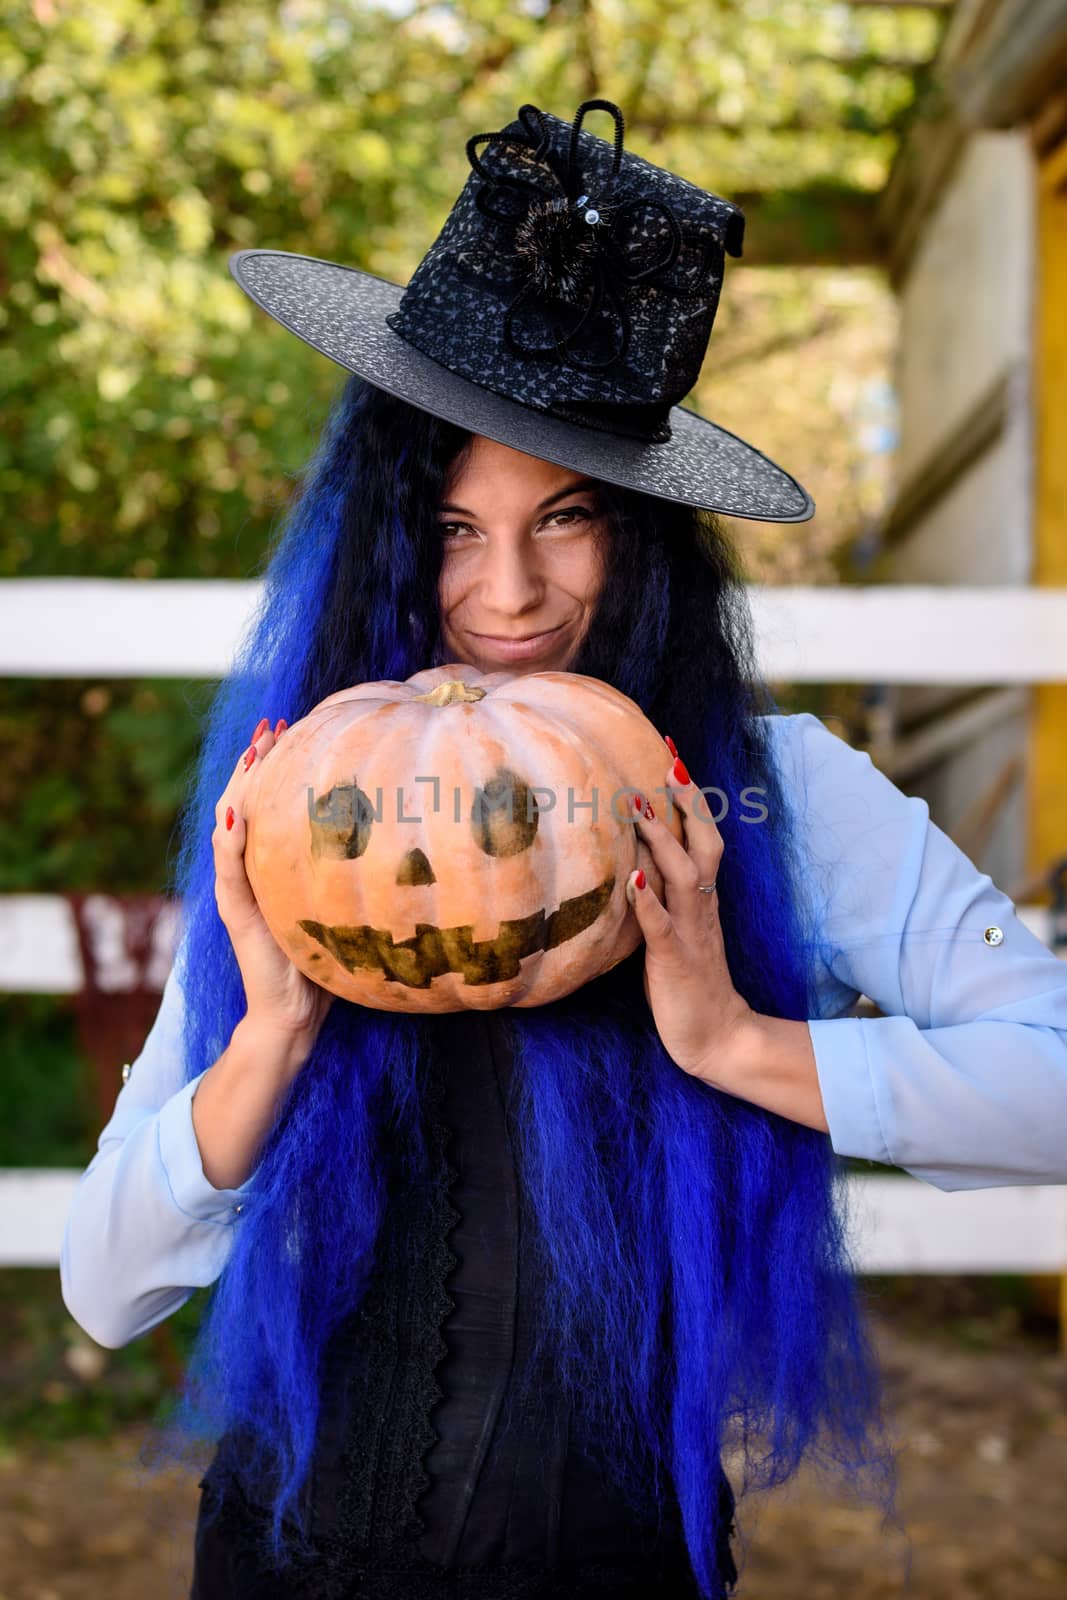 A girl in a witch costume with blue hair is holding a pumpkin with a painted face by Madhourse